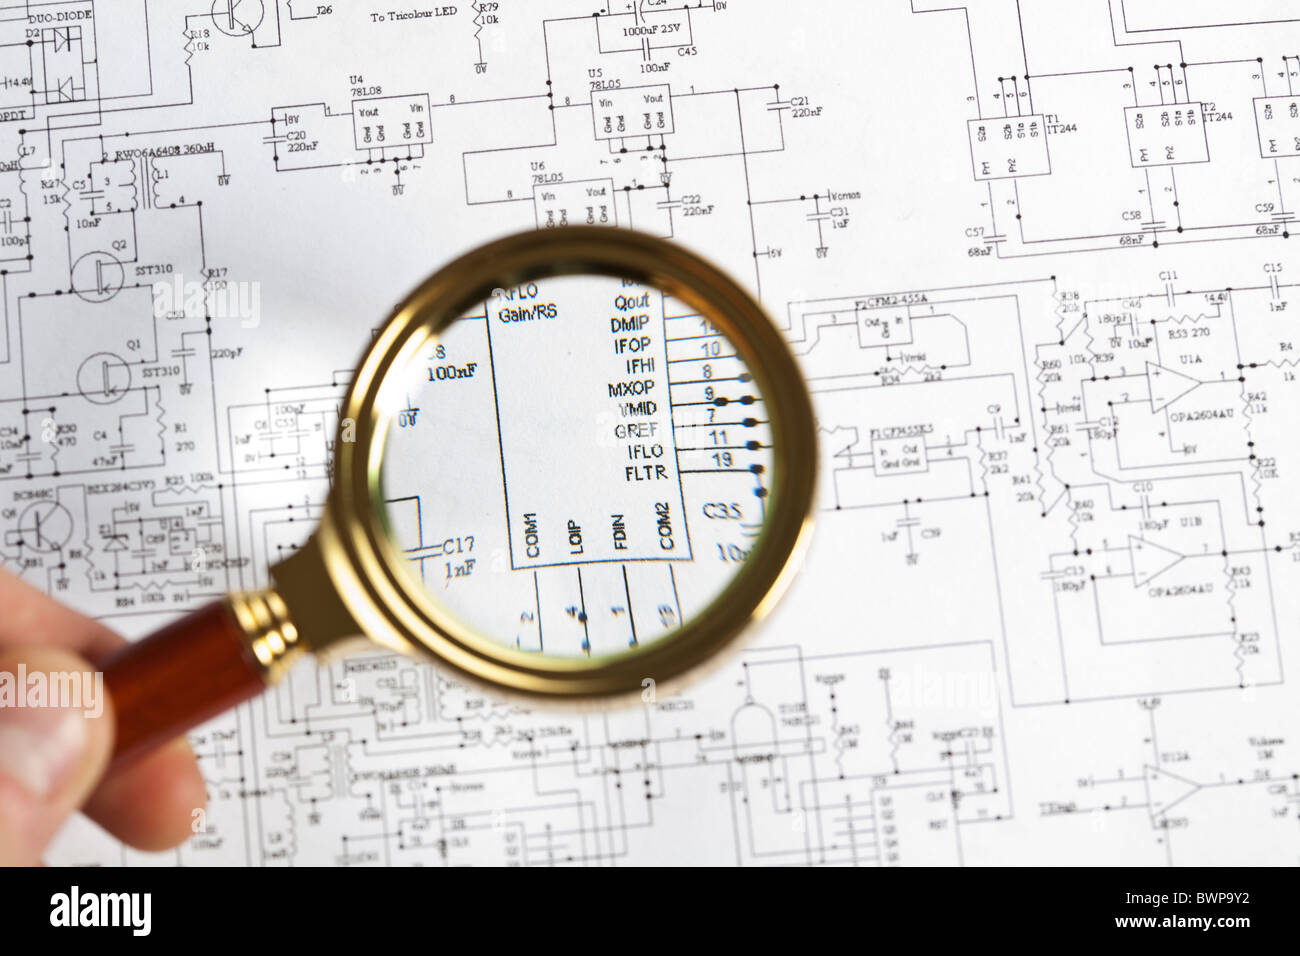 An electronic schematic diagram. Ideal technology background. Stock Photo